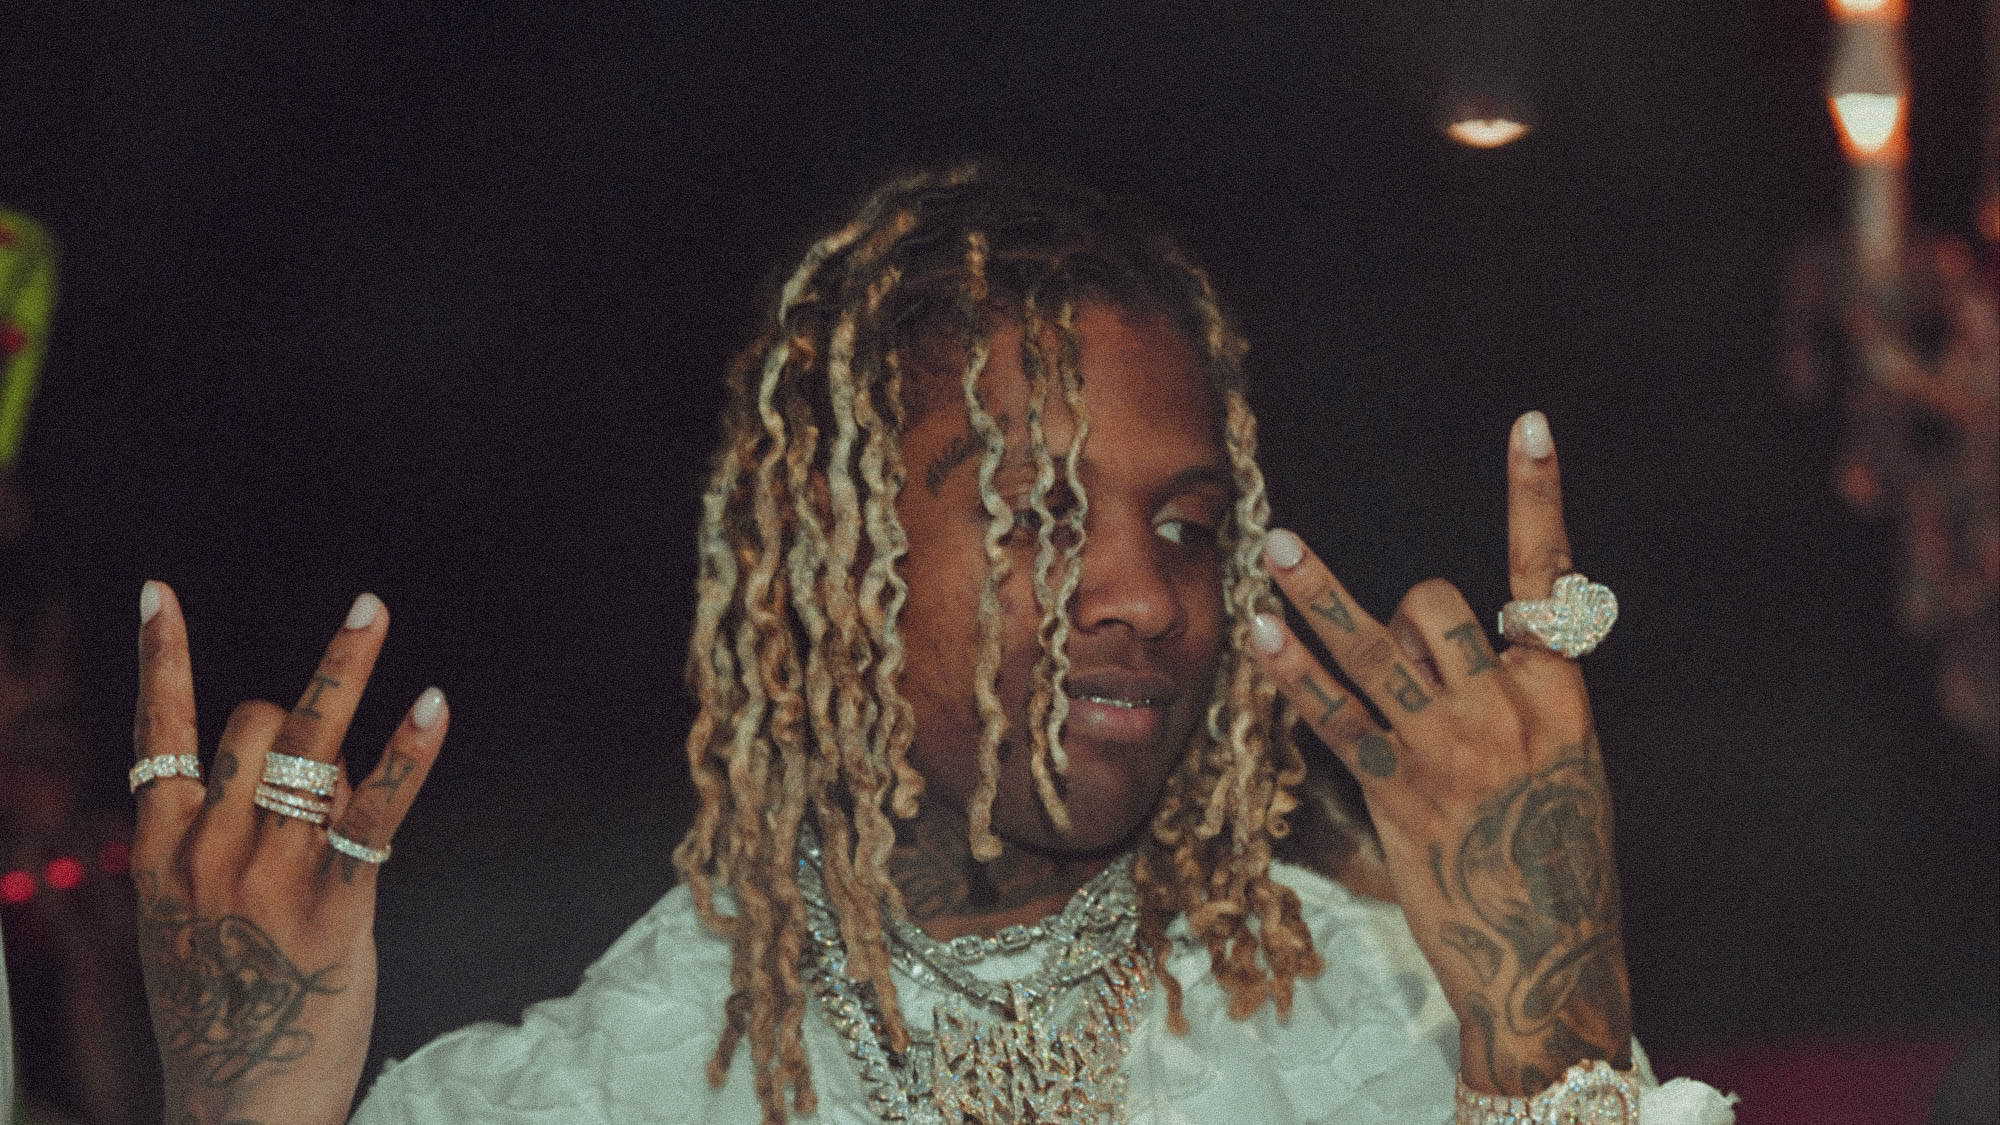 Lil Durk Back On Road With The "7220" Tour